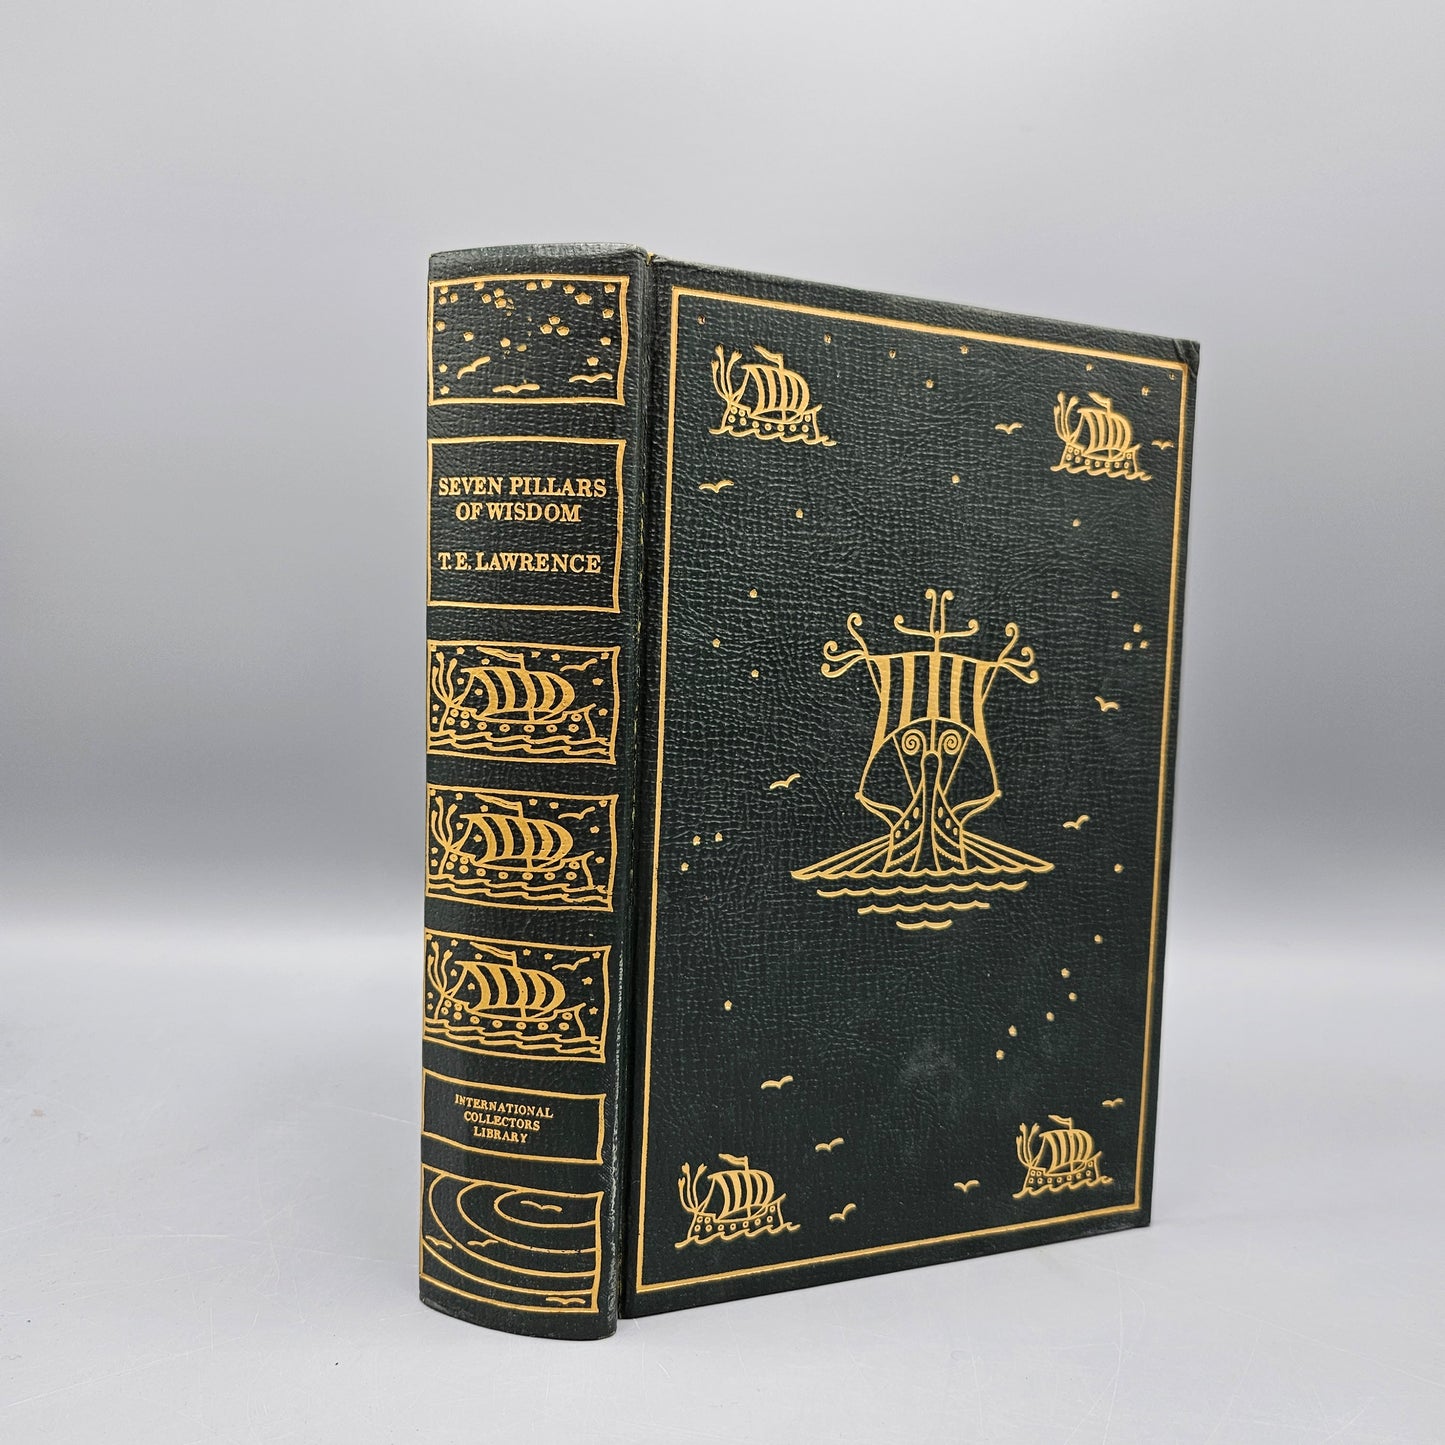 TE Lawrence "Seven Pillars of Wisdom" International Collectors Library